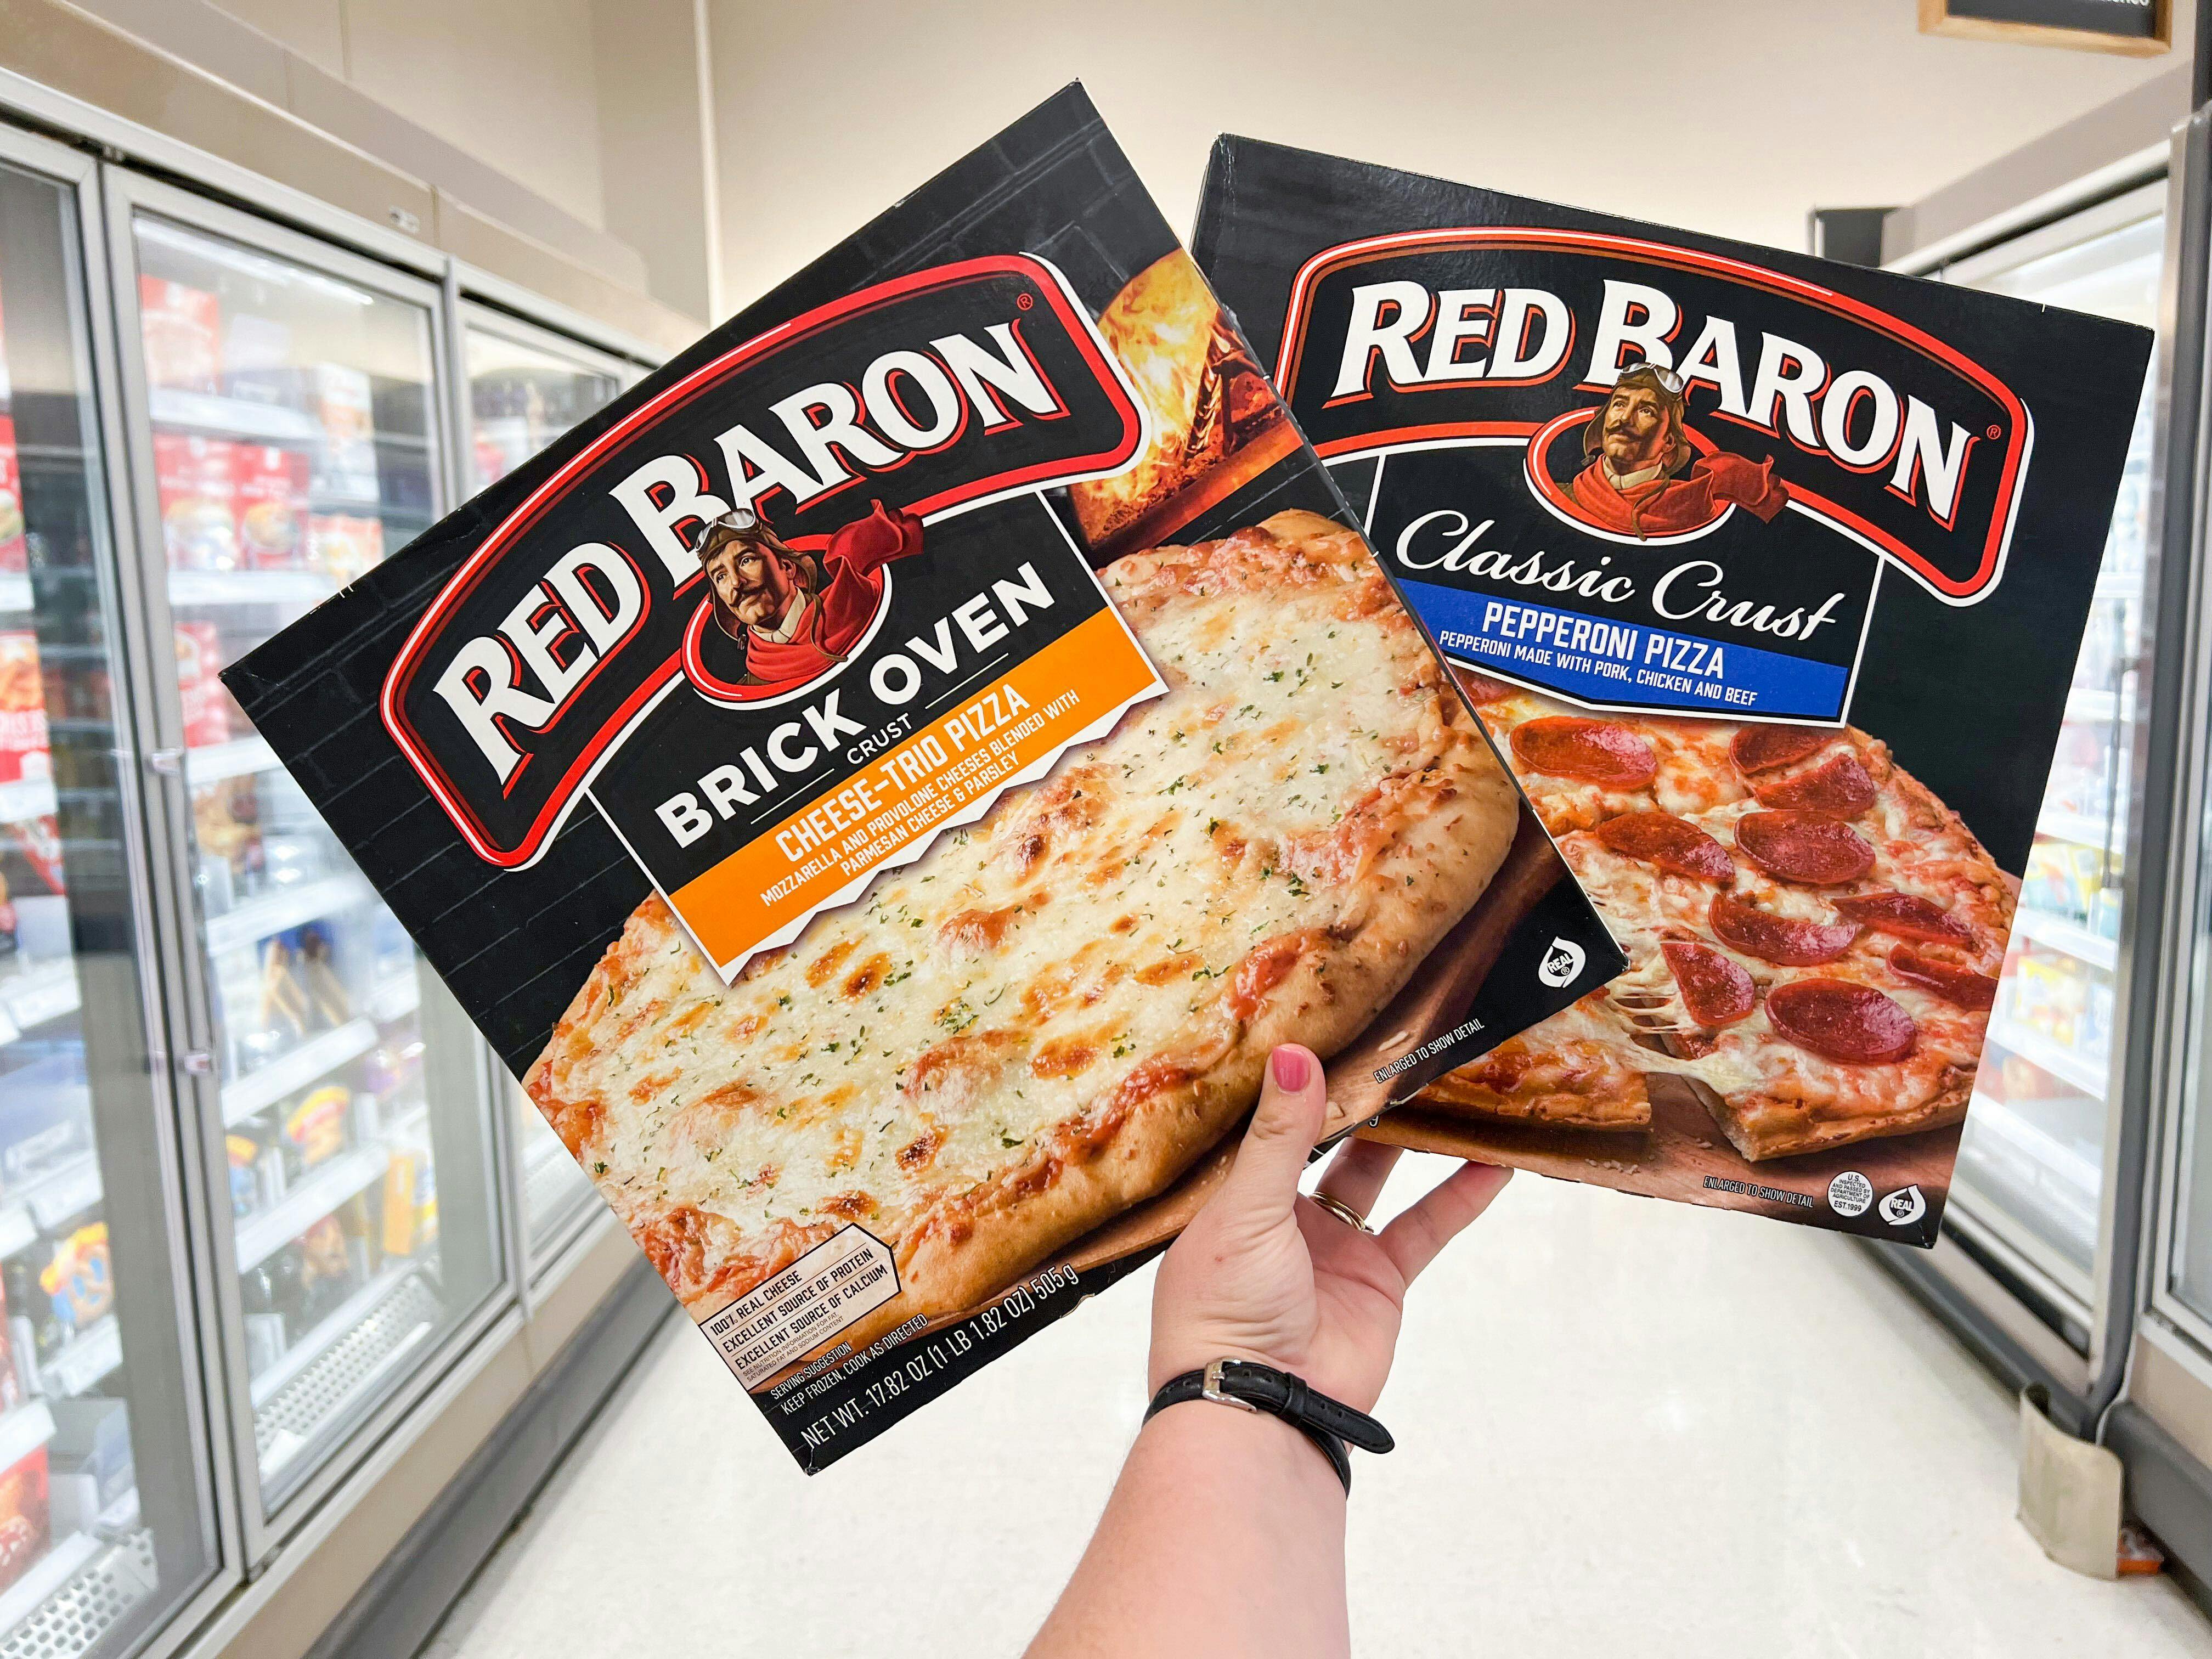 Red Baron Frozen Pizzas, Only $3.79 Target — No Coupons Needed - The Krazy Coupon Lady